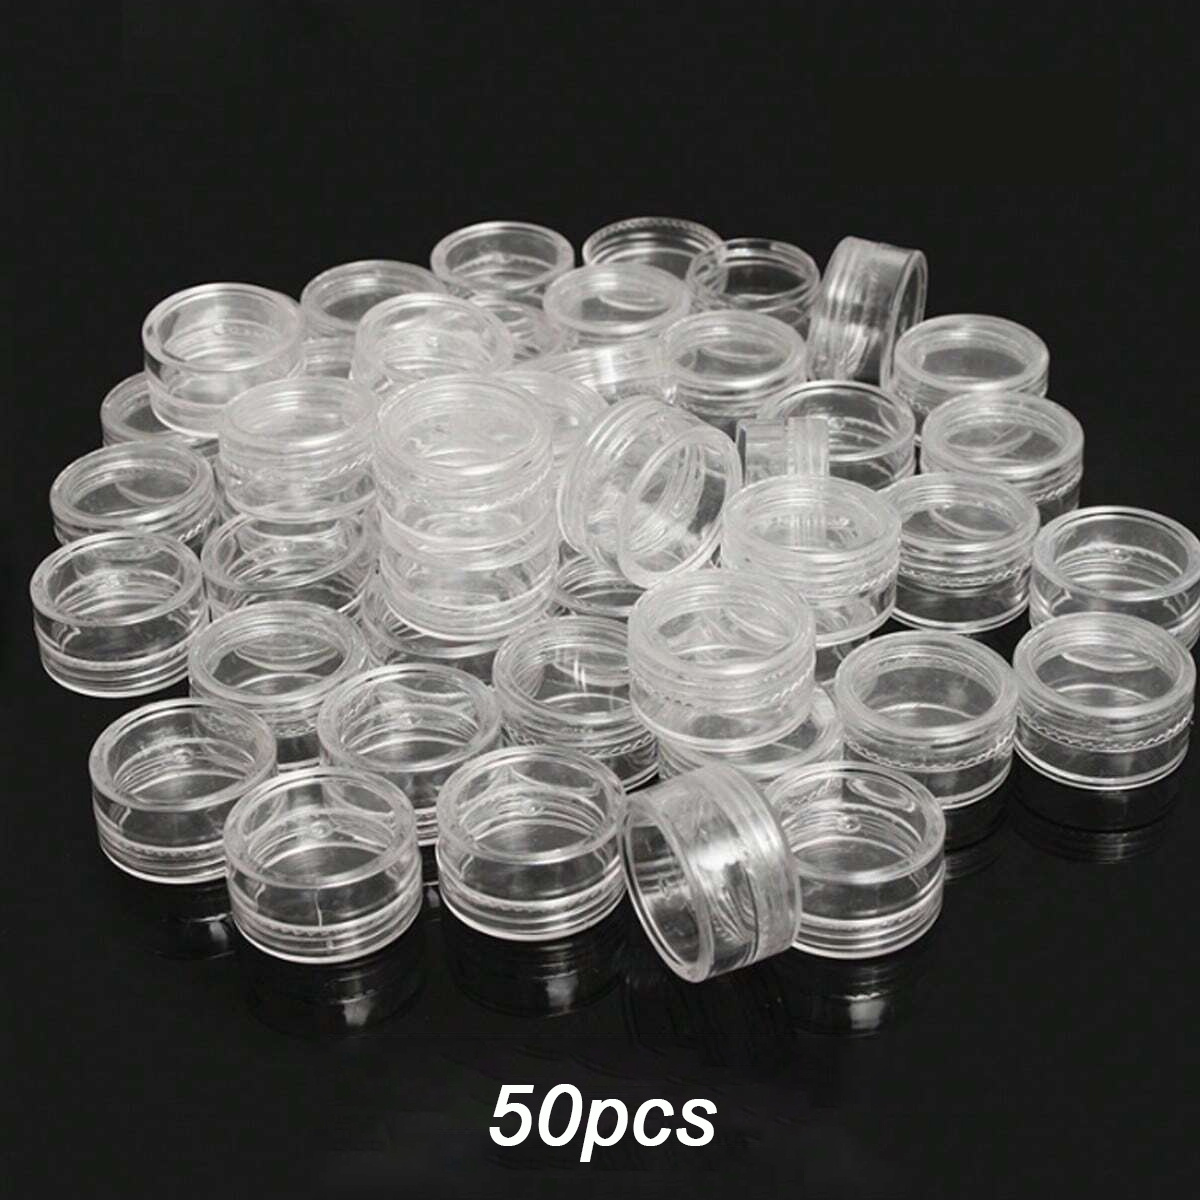 

50 Pack Clear Round Plastic Small Storage Containers With Lids, Transparent Sealing Organizer Boxes For Nail Art, Glitter, Beads, Jewelry Display And More - Durable And Compact